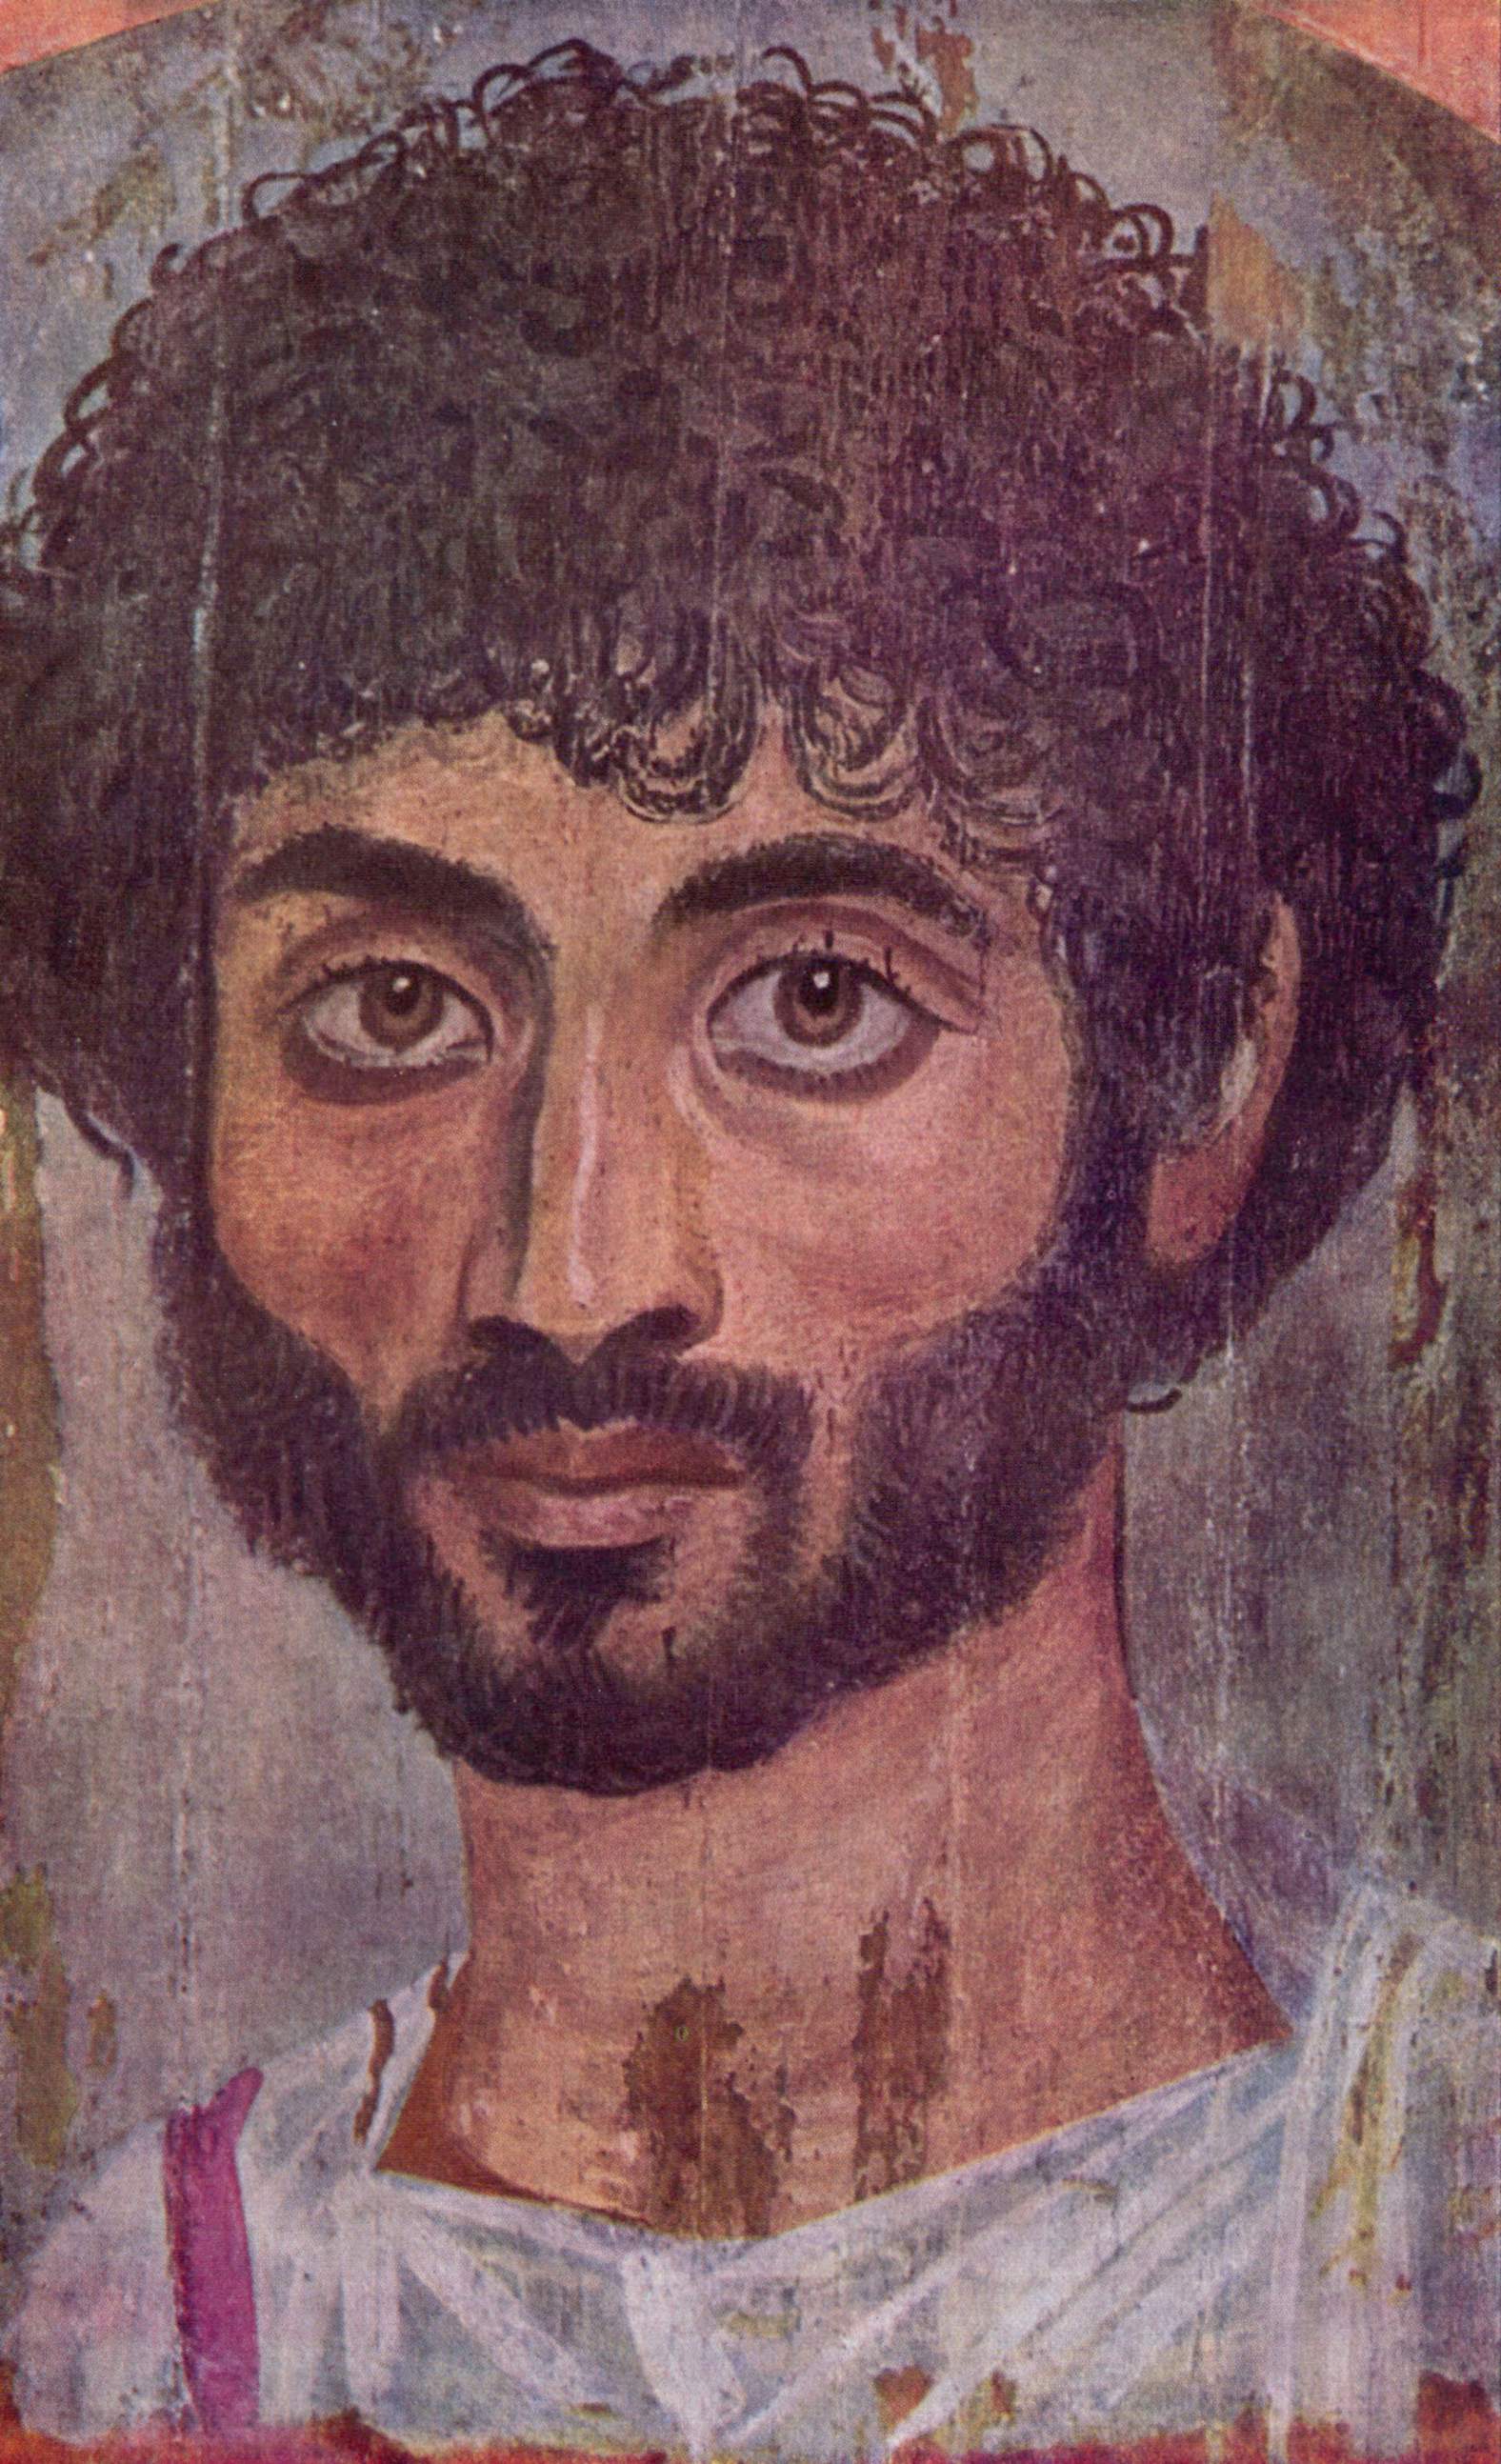 Portrait of a man from the Fayum province, Metropolitan Museum of Art.